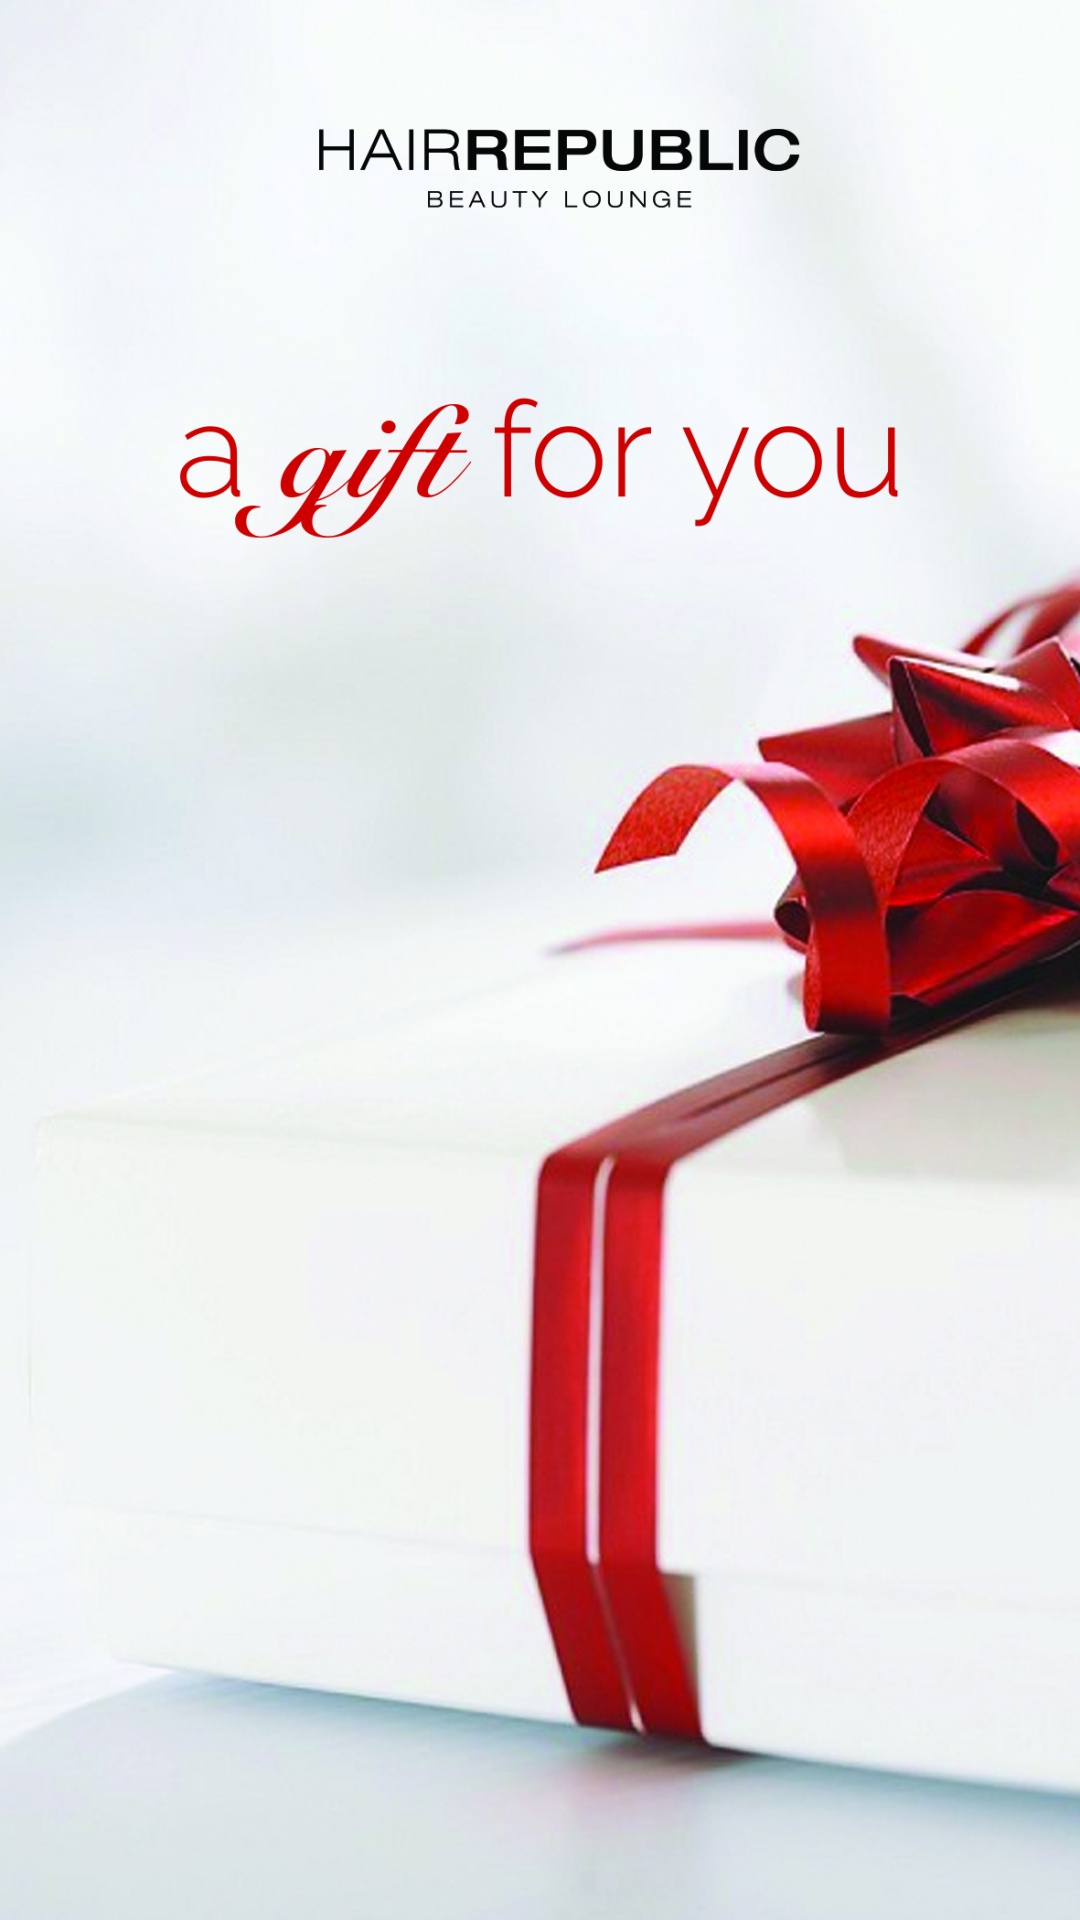 Gift, Gift Card, Red, Carmine, Ribbon. Wallpaper in 1080x1920 Resolution